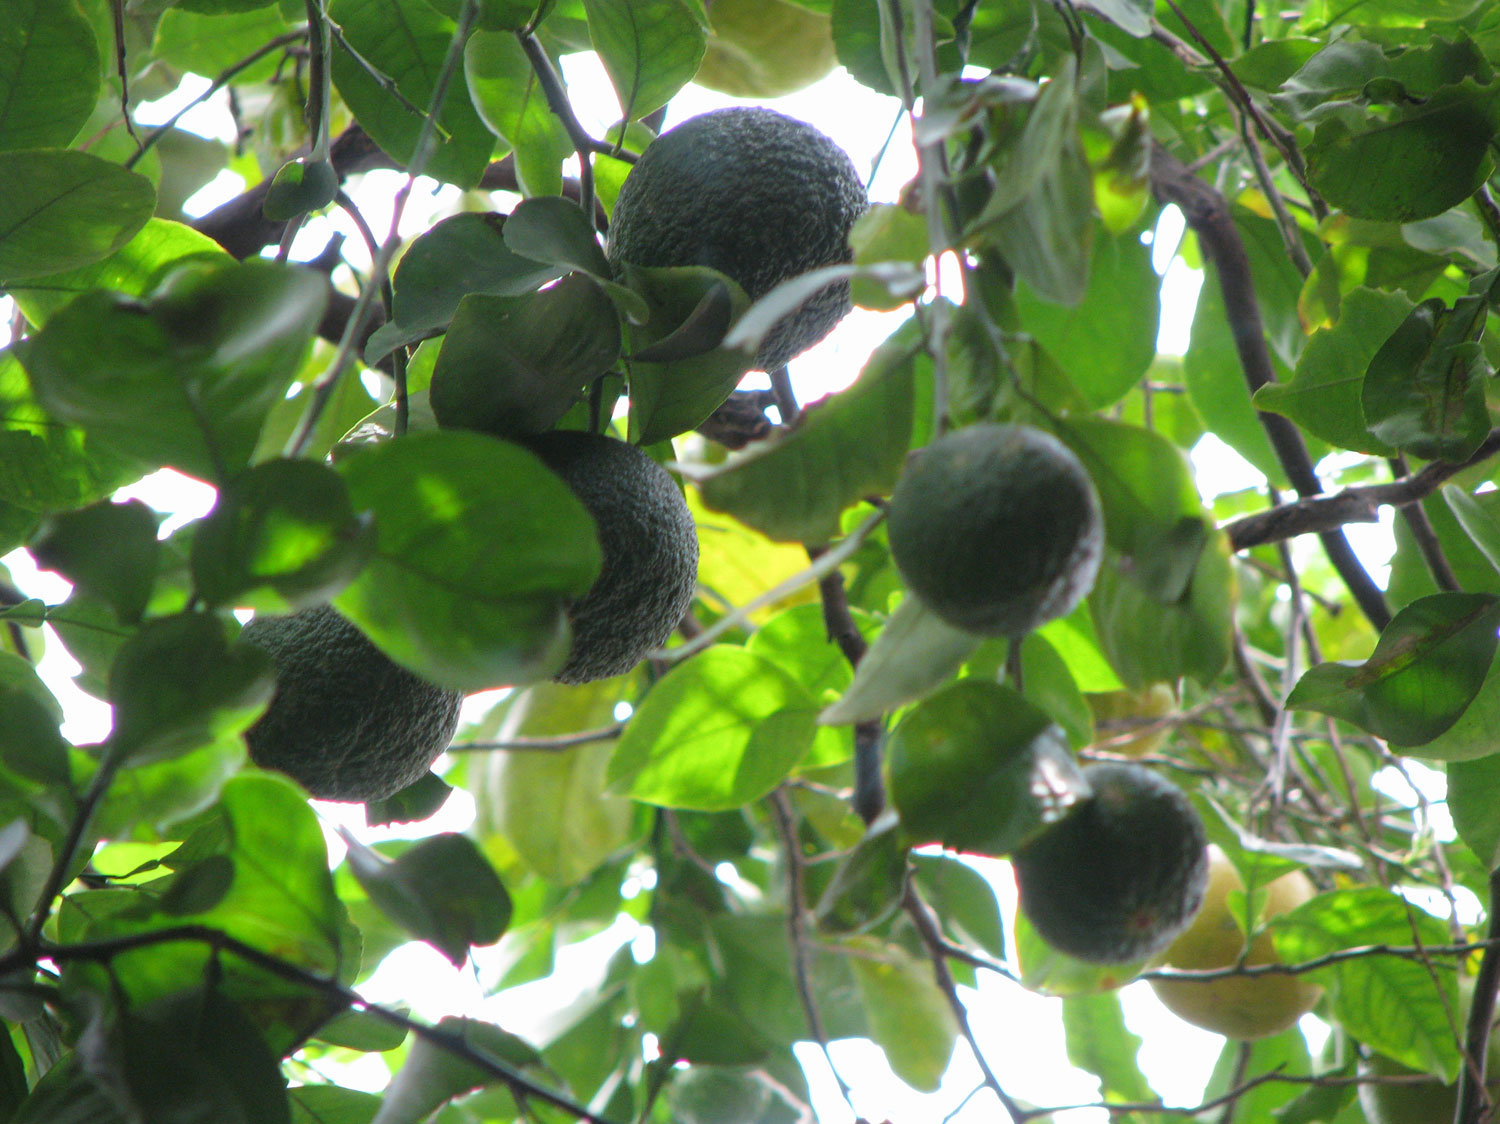 Close-up of the fruit high in a tree inside Jane and Andrew's house.